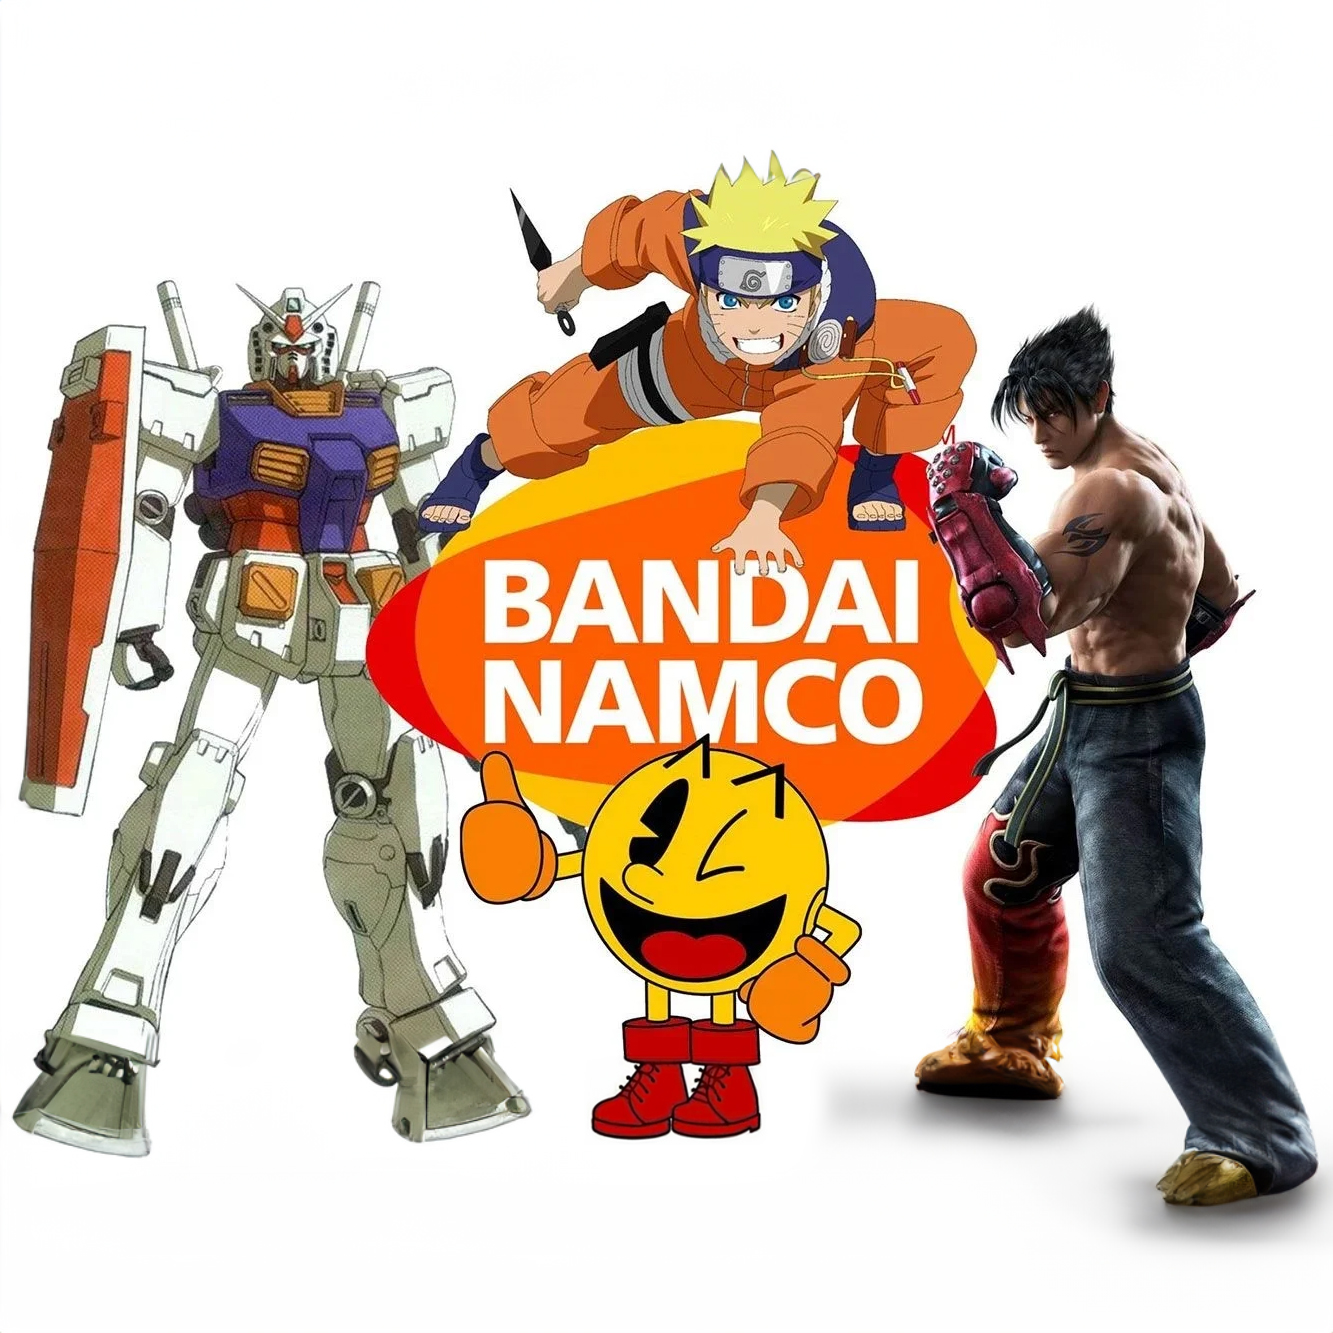 Bandai Namco Entertainment: Fusion of Innovation and Cultural Heritage